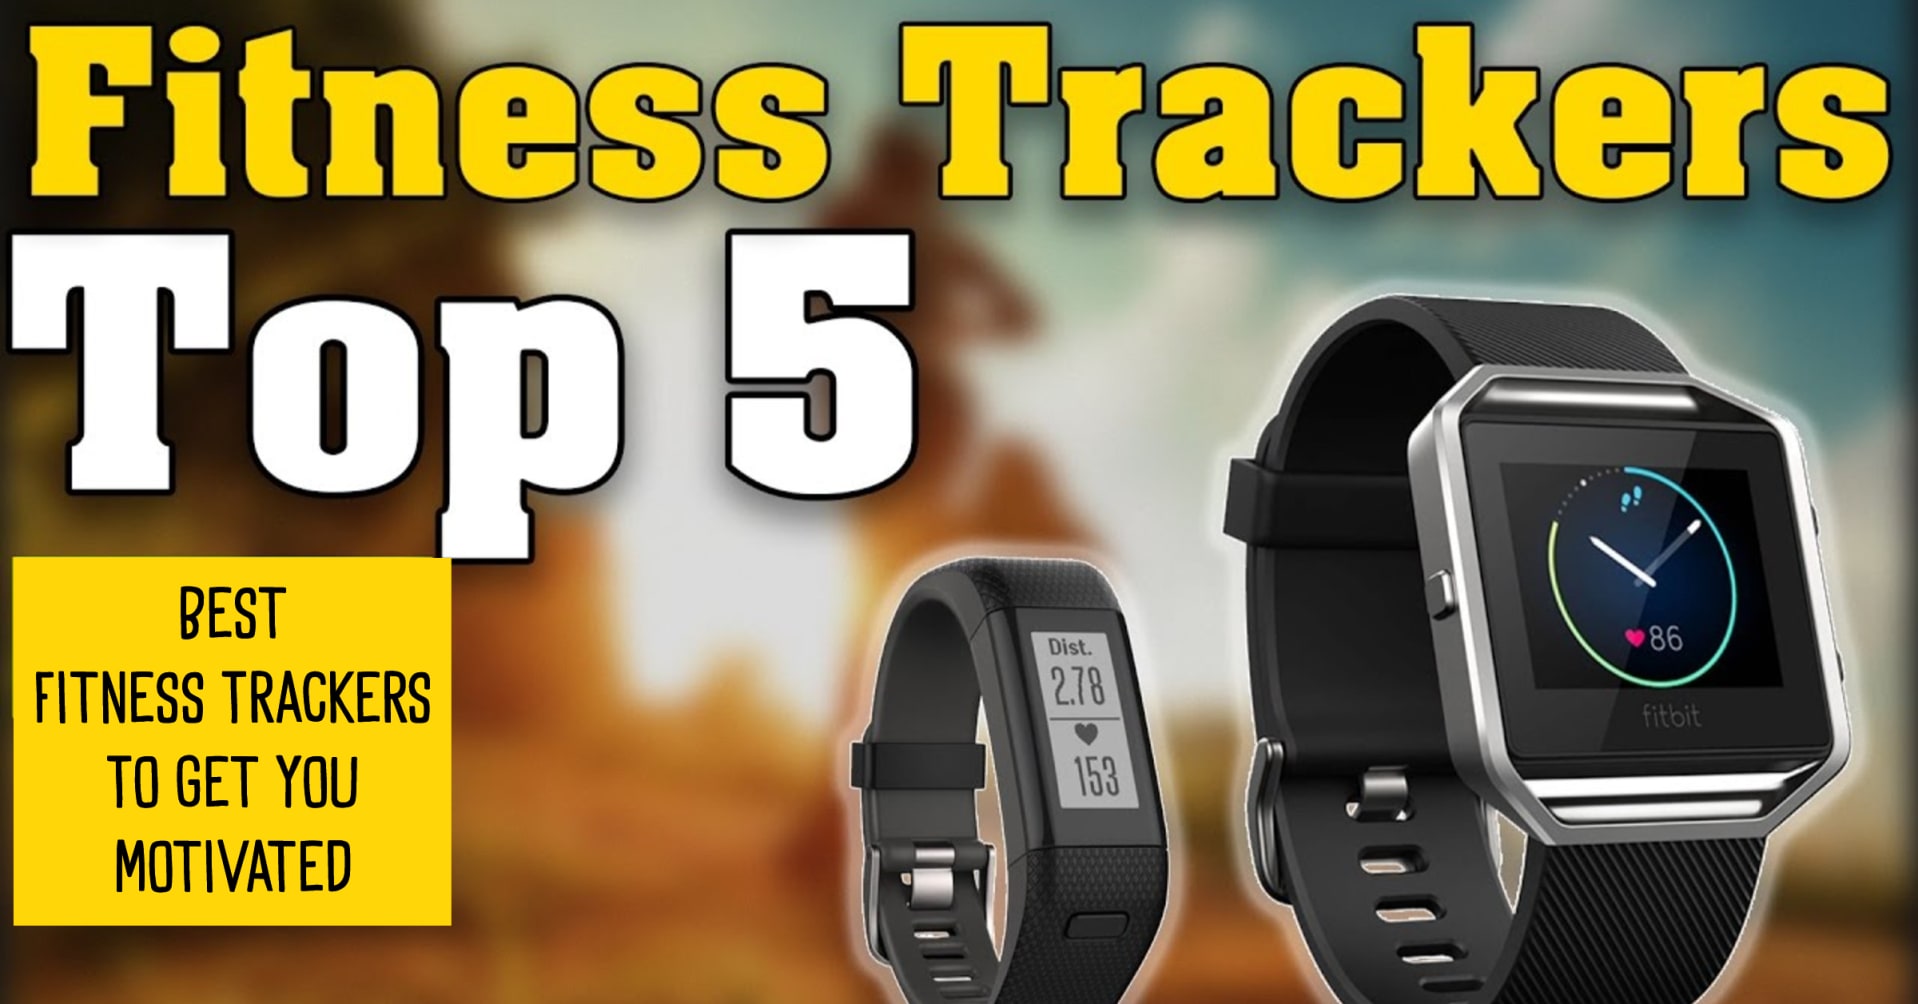 Fitness Trackers - will a fitness watch or fitness tracker get you motivated?  These are the best fitness watch trackers this year